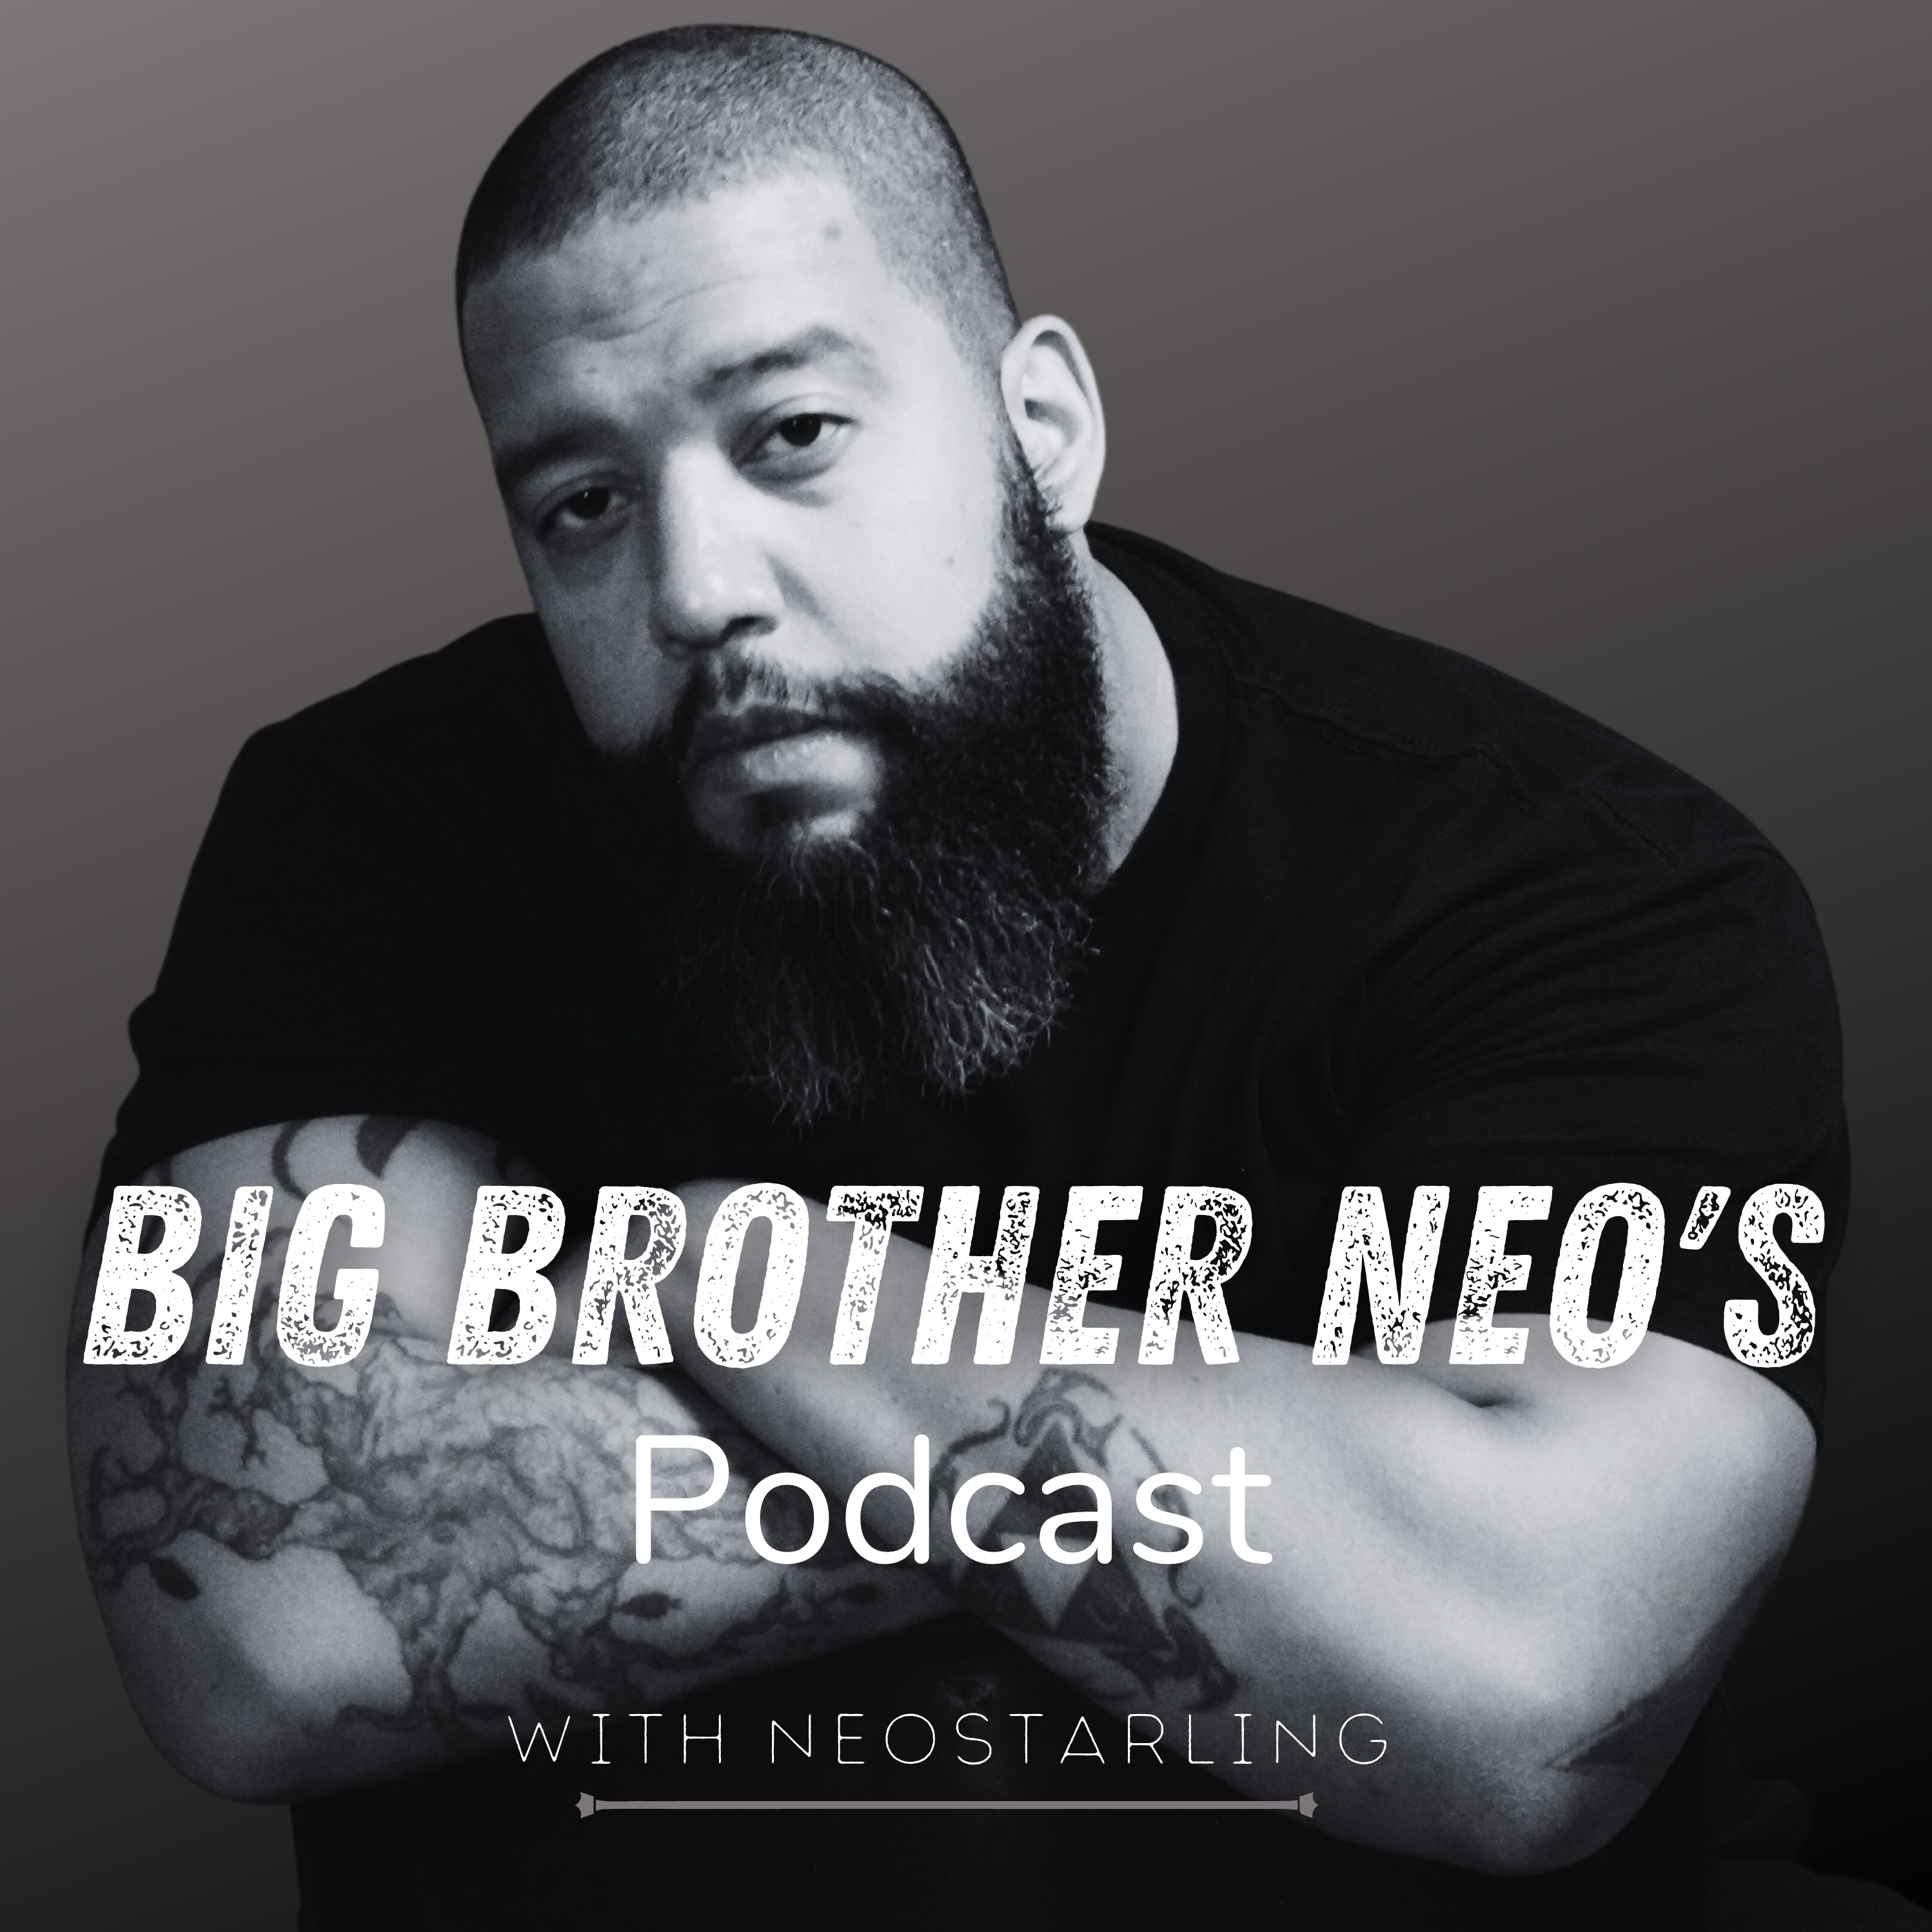 Big Brother Neo’s Podcast